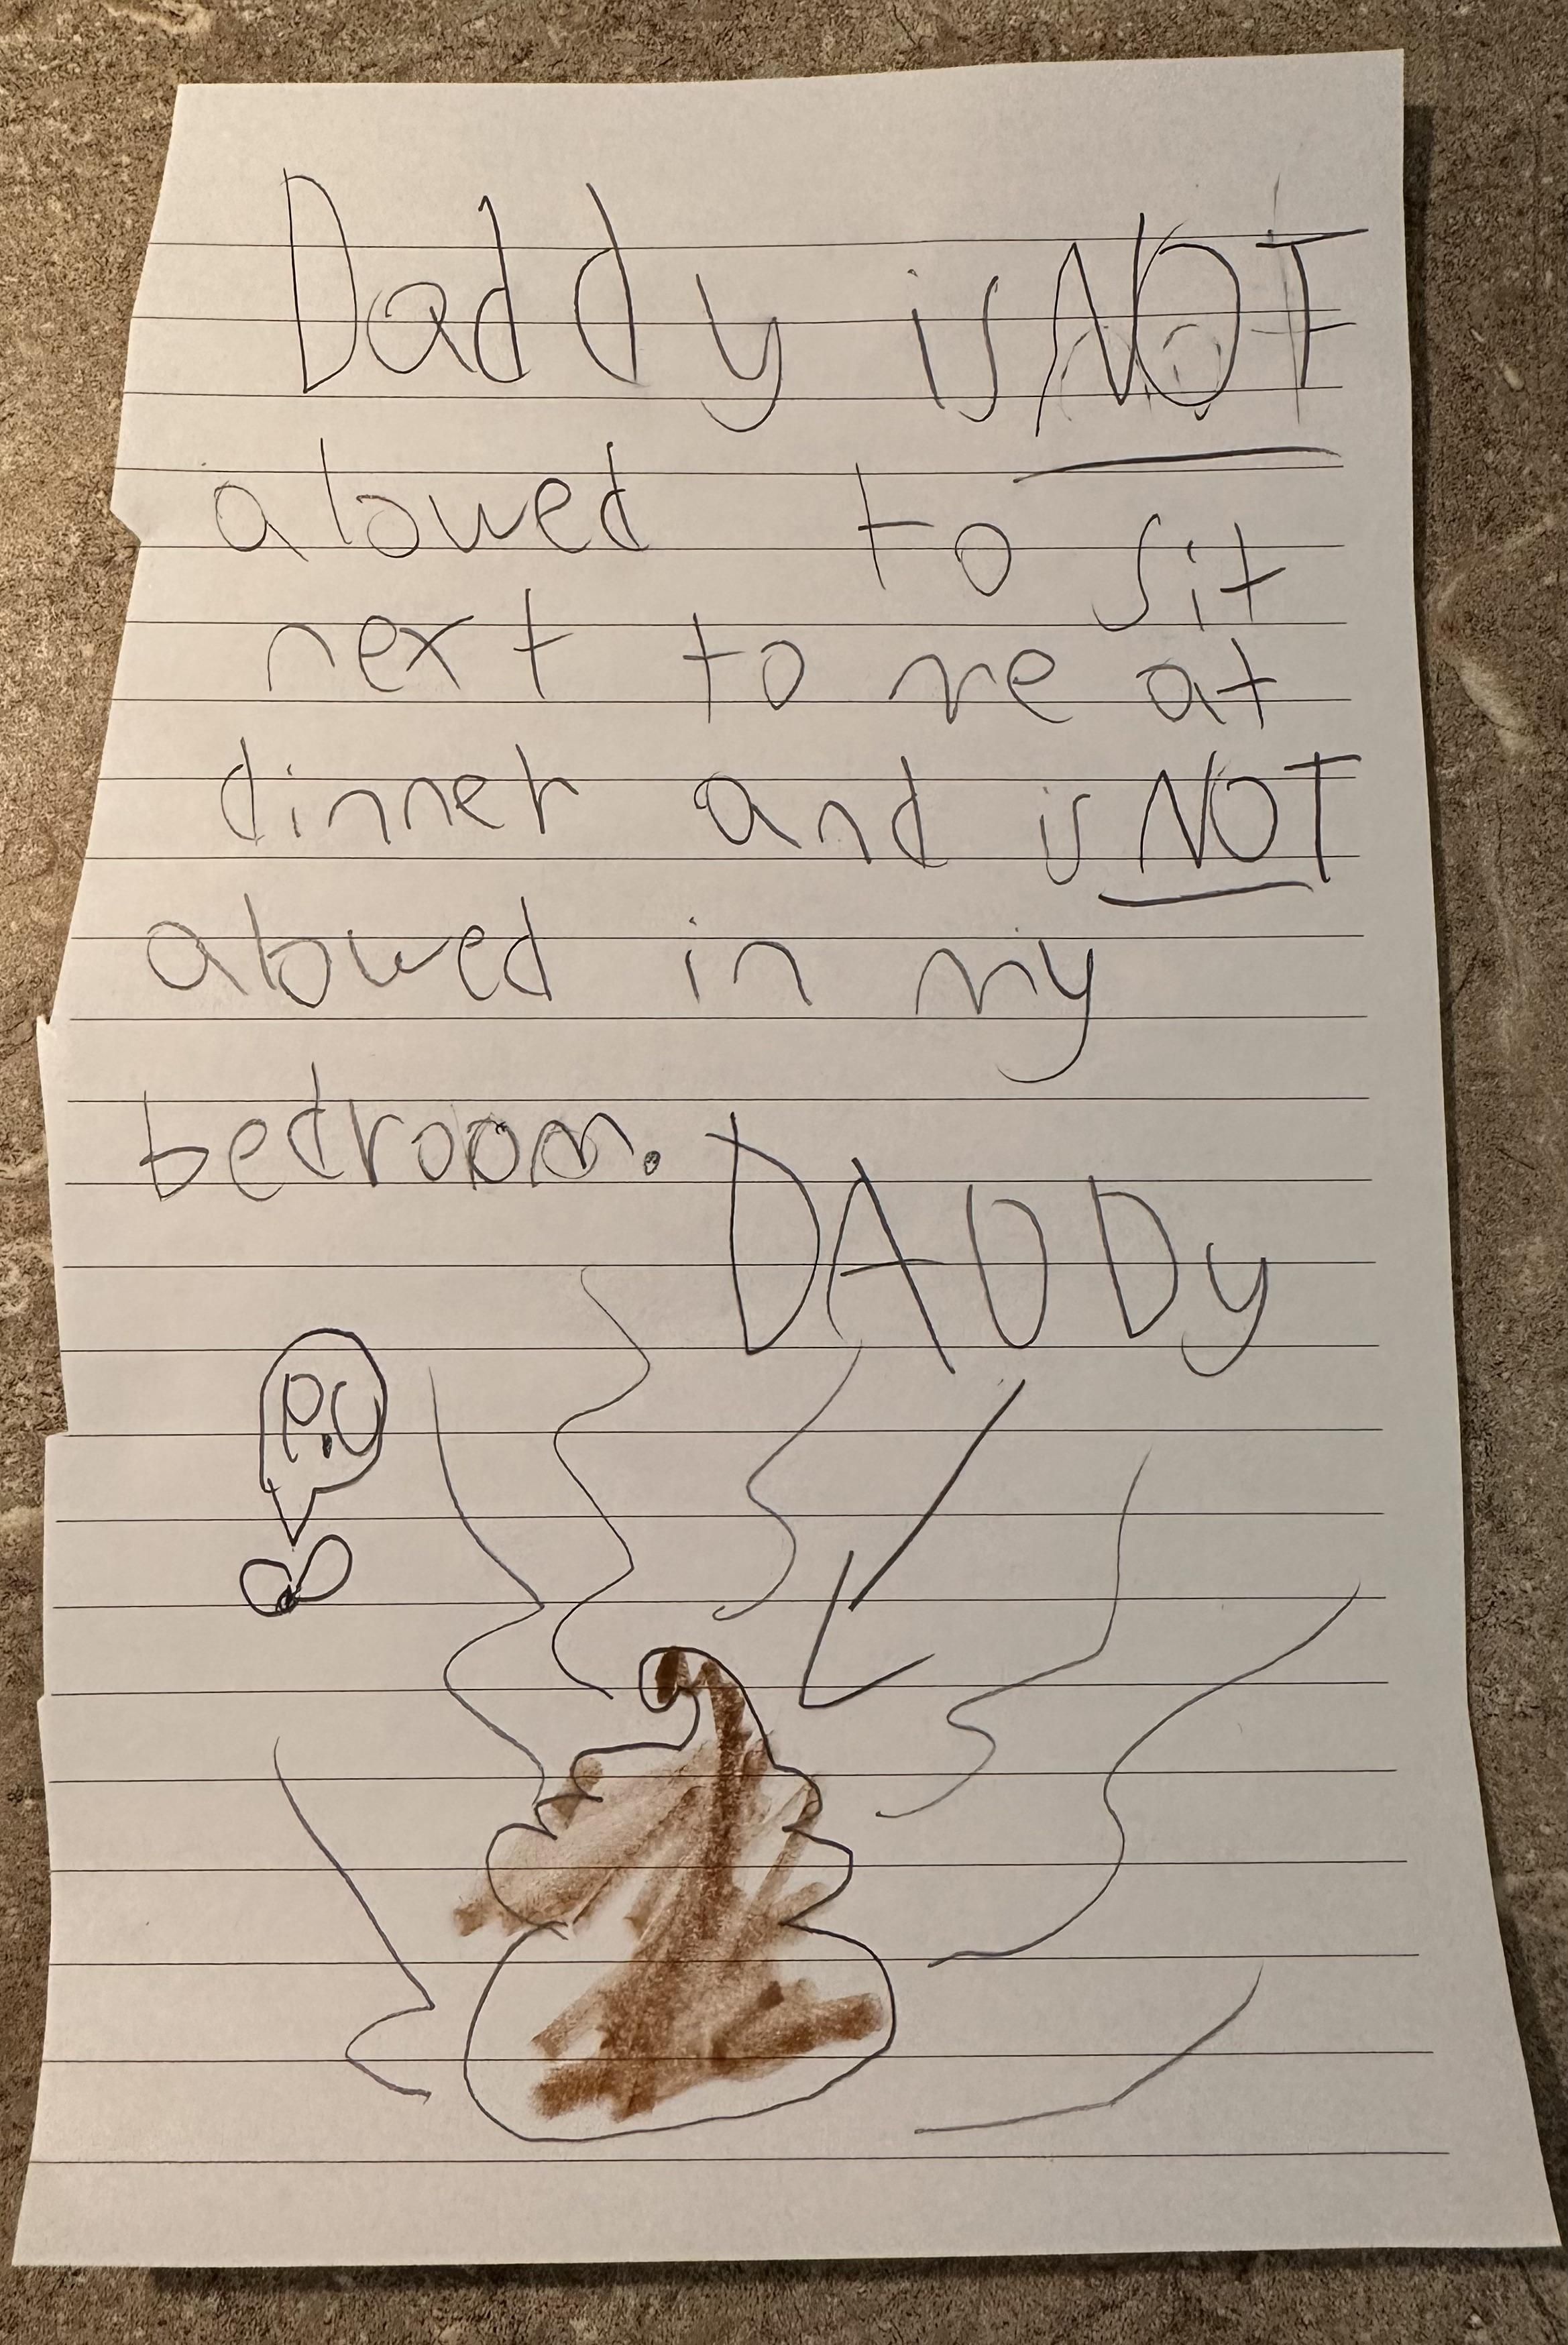 My 8 year old daughter slipped this under my door after I purposely scared the hell out of her.